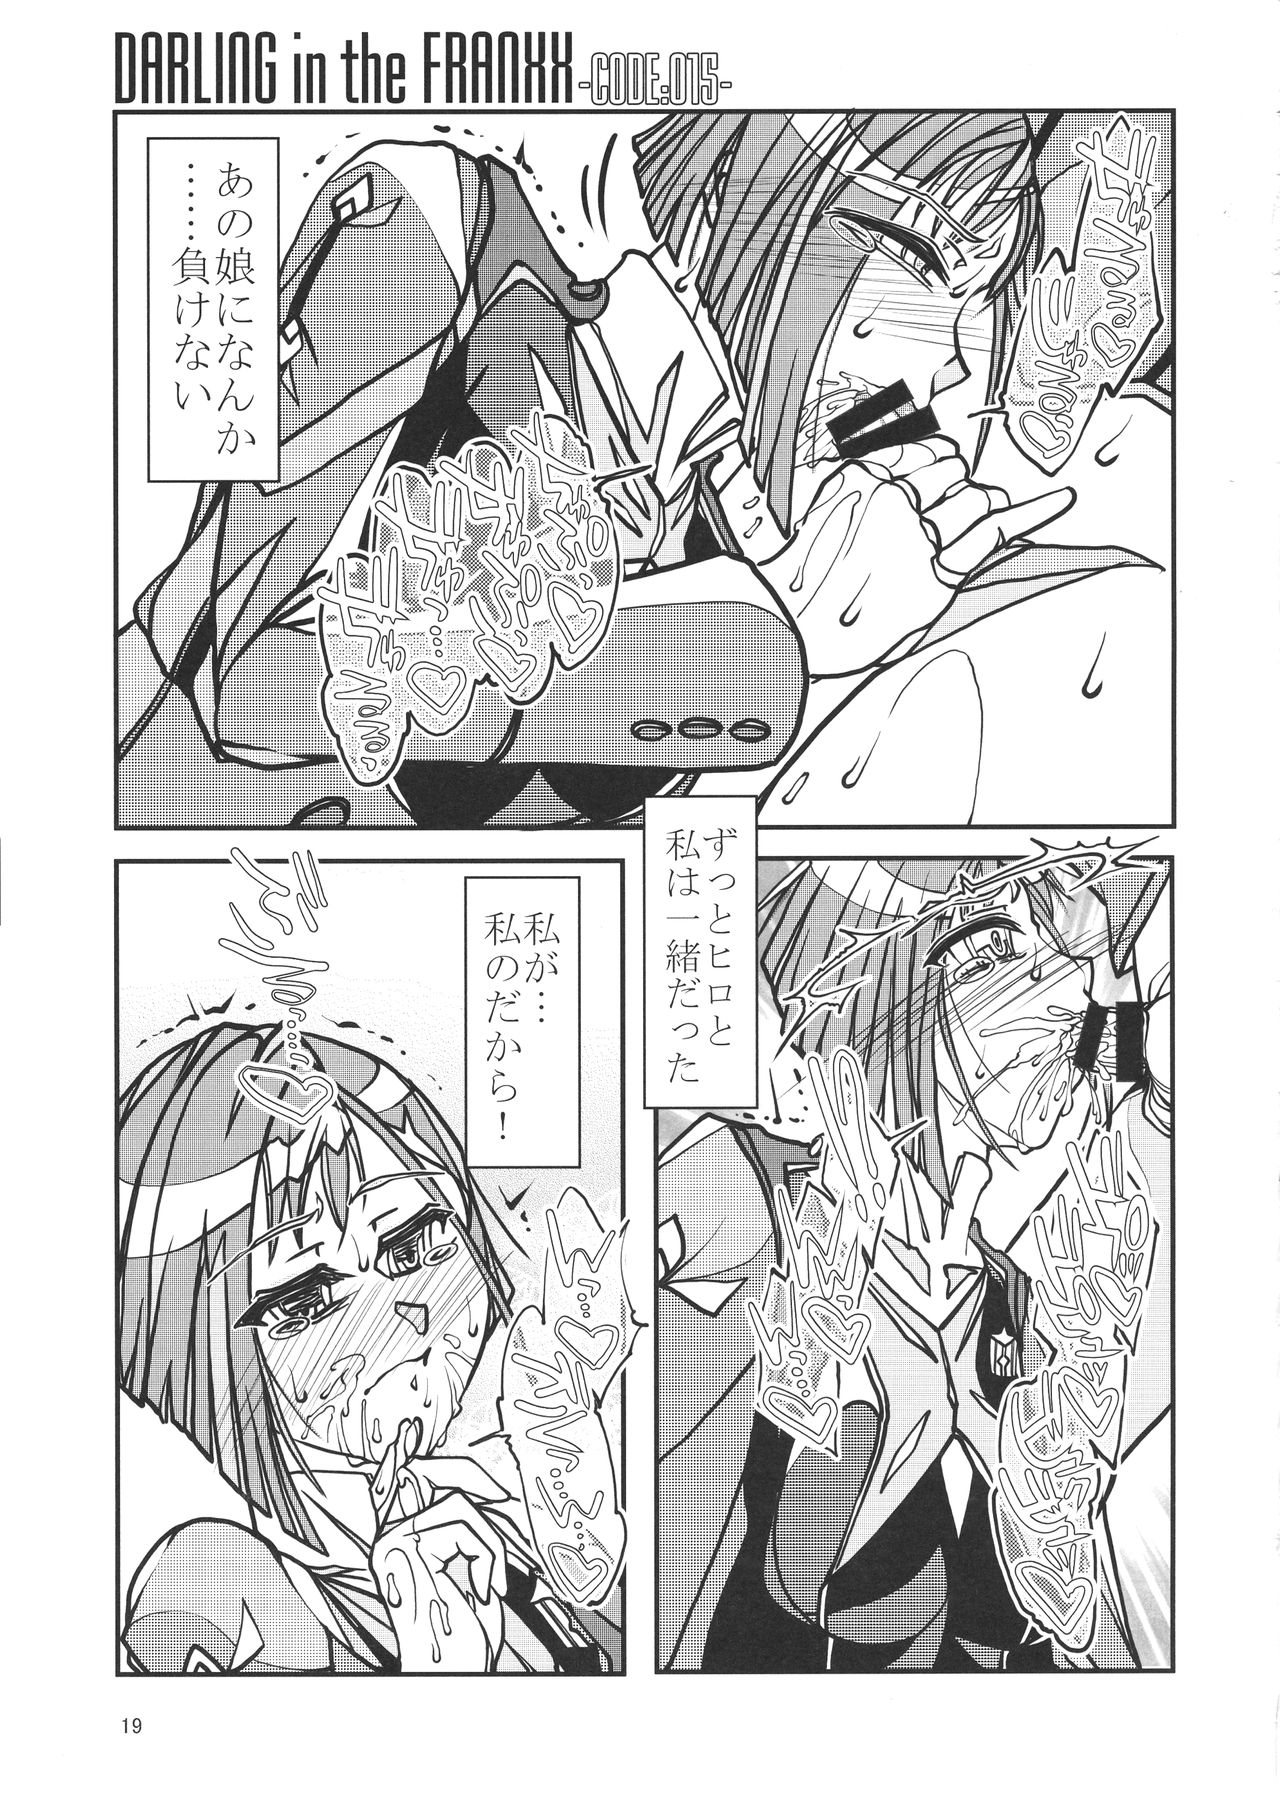 (COMIC1☆13) [冒険工房 (治臣)] DIVE in the DARLING (ダーリン・イン・ザ・フランキス)